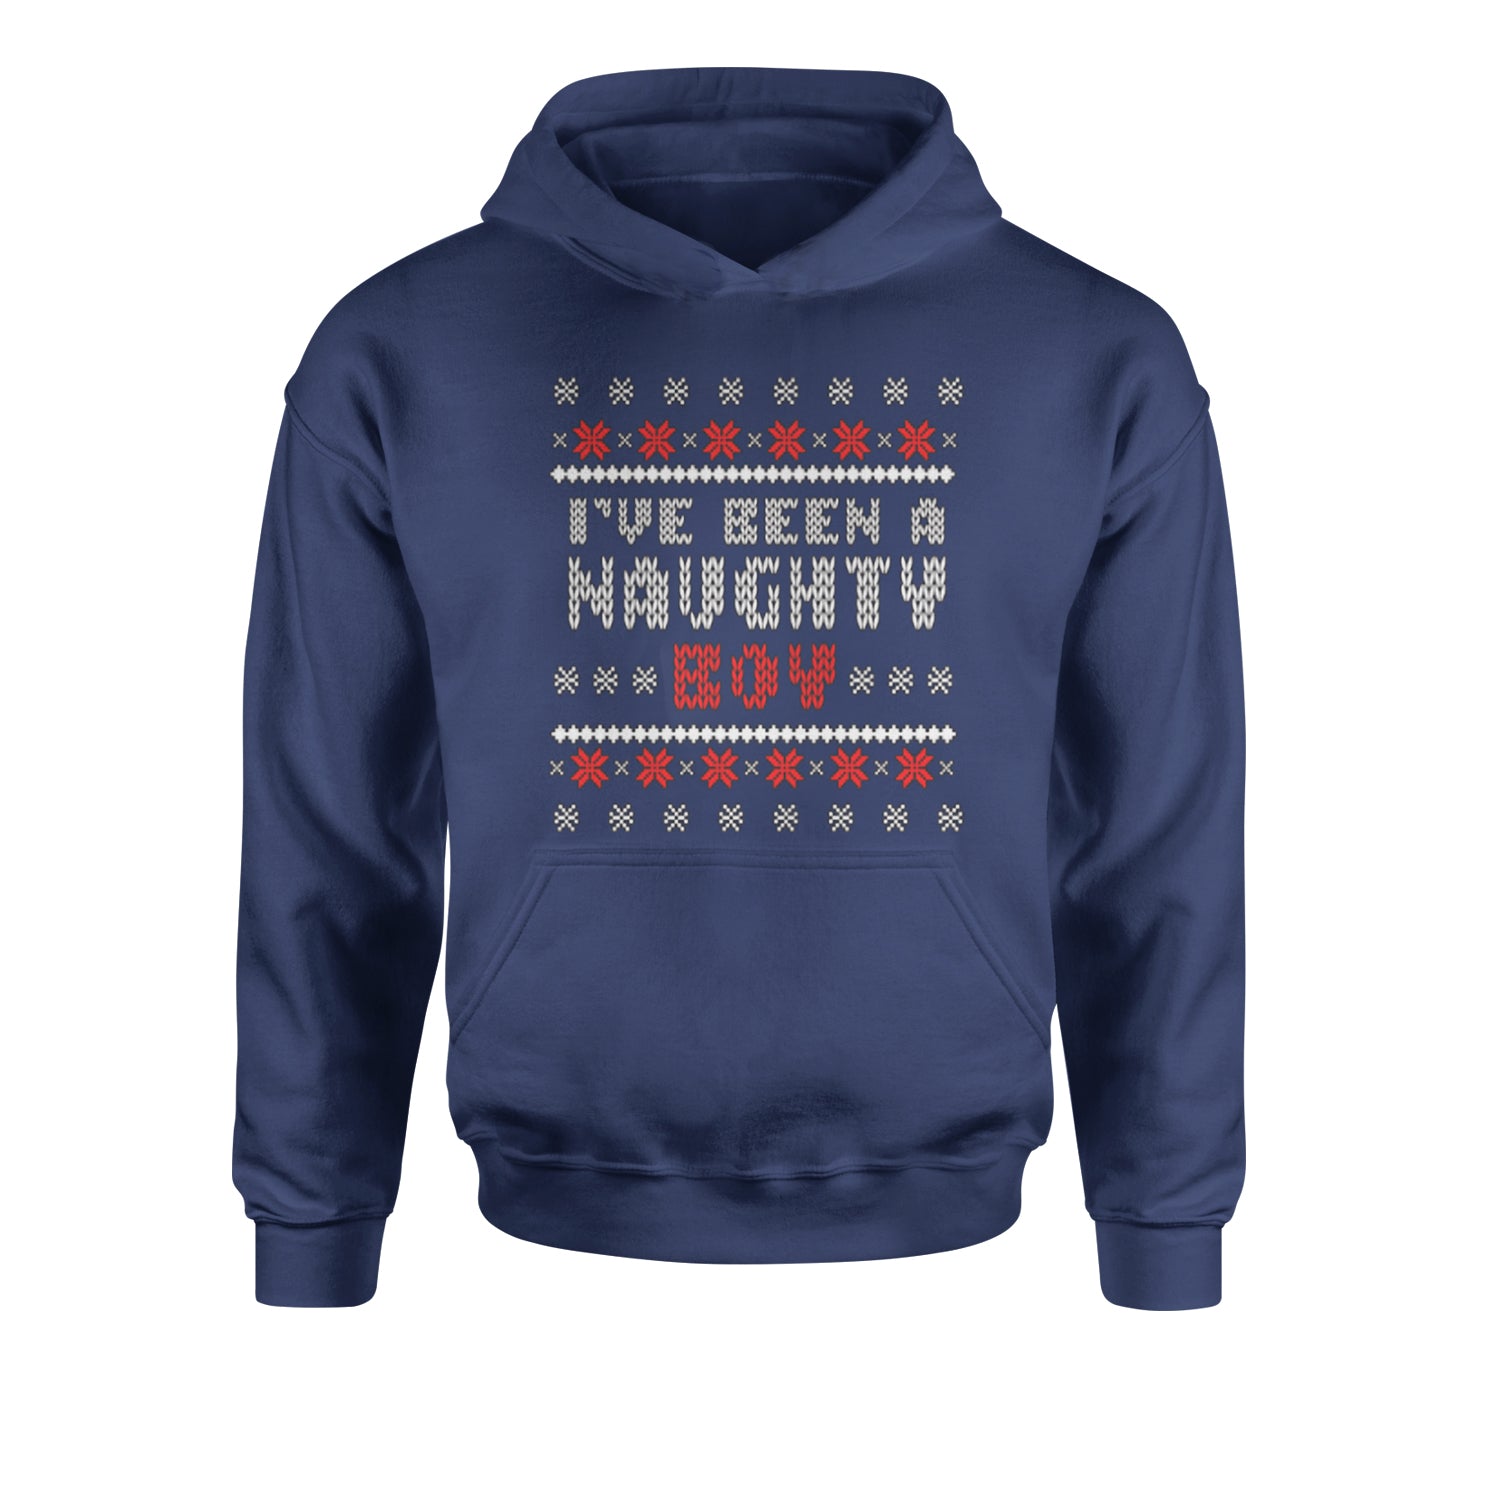 I've Been A Naughty Boy Ugly Christmas Youth-Sized Hoodie list, naughty, nice, santa, ugly, xmas by Expression Tees